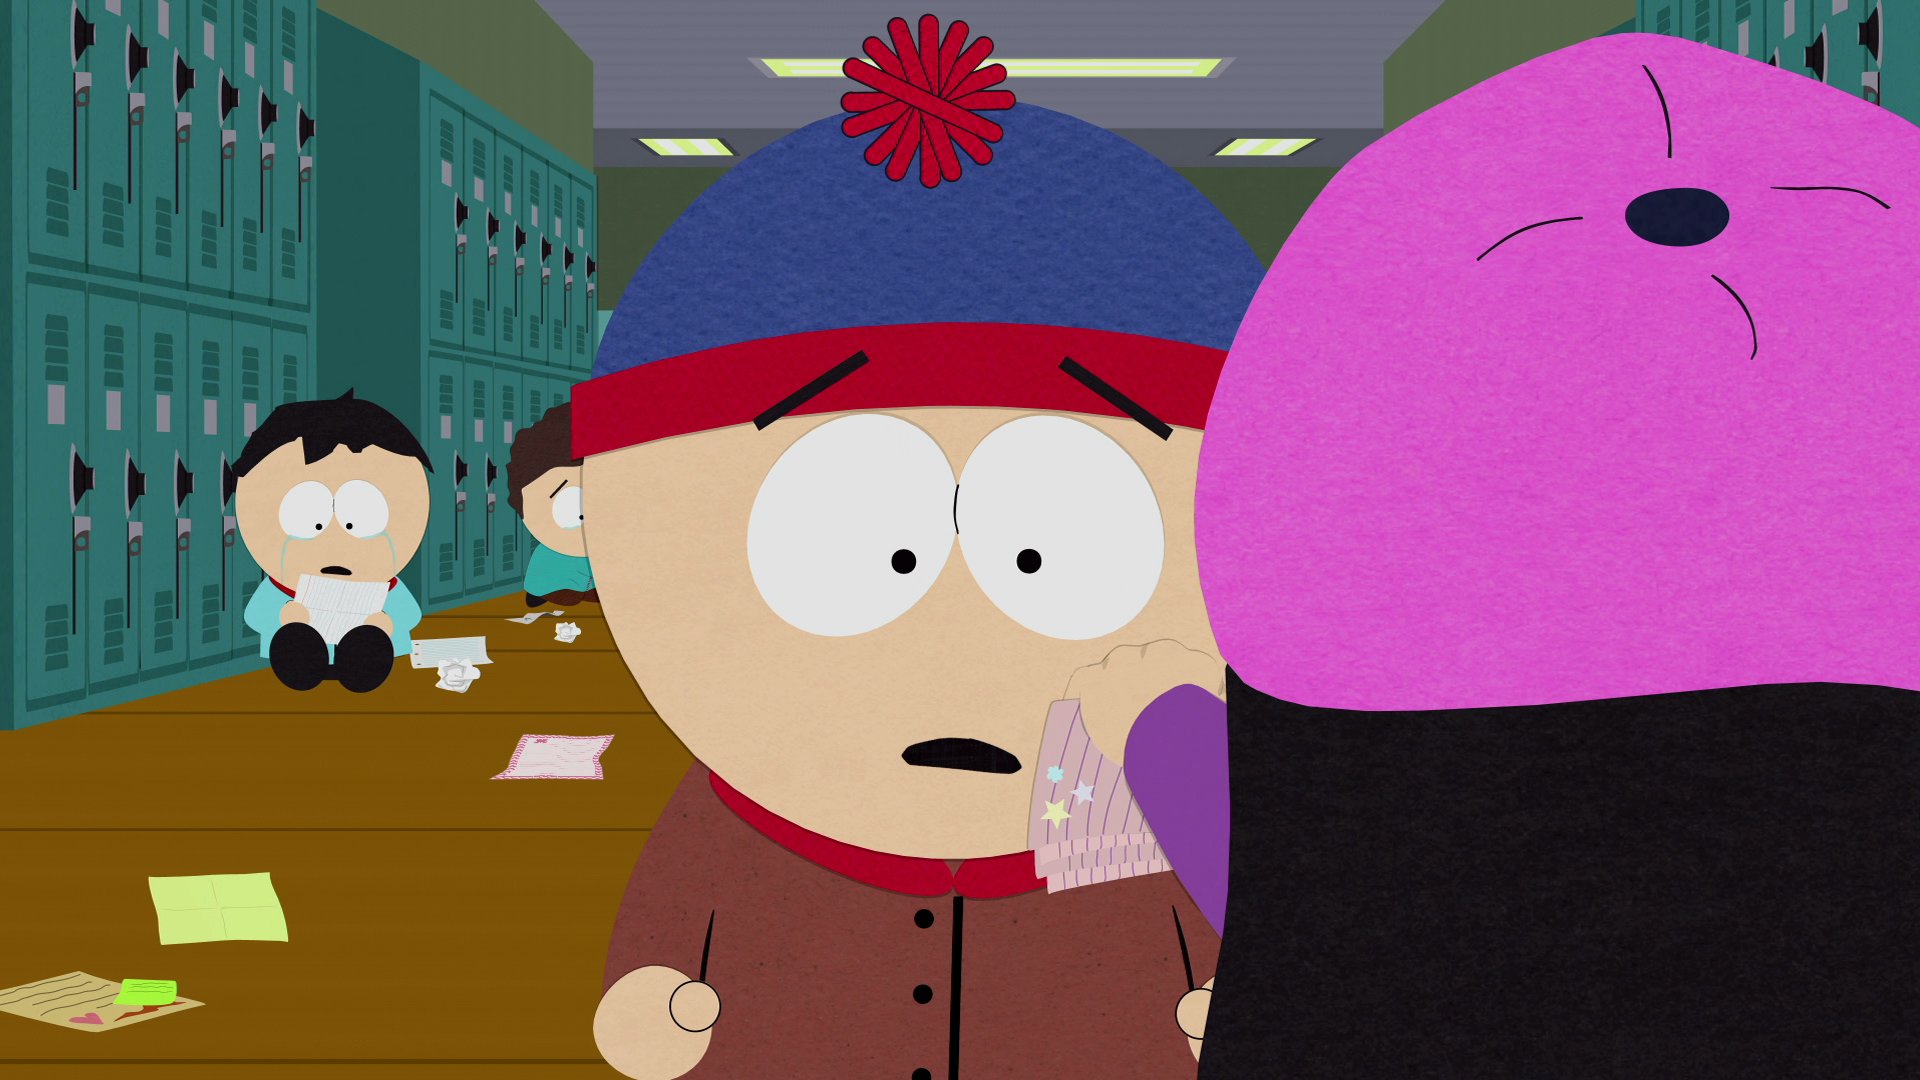 South Park on Twitter: "Due to the quick turnaround of the show, asset...